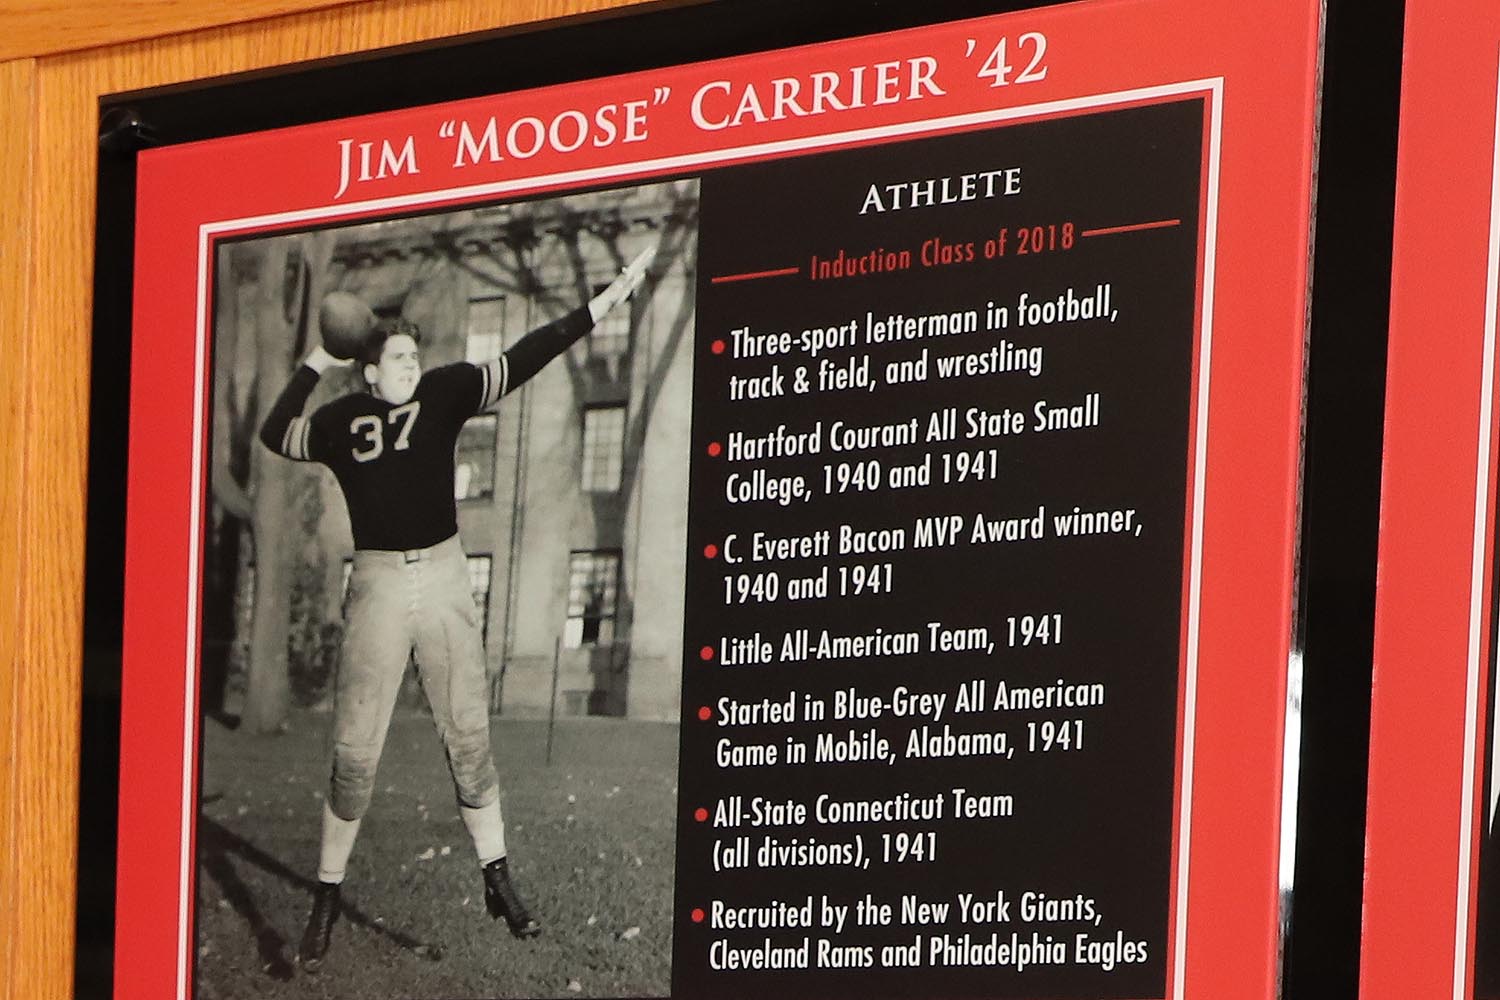 James Carrier '42 (football, track and field, wrestling) – James, who is being inducted posthumously, was a three-sport athlete at Wesleyan who competed in football, track, and wrestling. He excelled in football and was named a team captain during his junior and senior seasons. James started all 24 games during his four-year career and led the football team to a Little Three Championship in 1939. He rushed for 12 career touchdowns, passed for 22, converted 35 points-after-touchdowns (PATs), and scored or contributed to 242 points during his career as a Cardinal. James also starred in the New Year’s Collegiate Football Classic in Mobile, Alabama, in 1942.